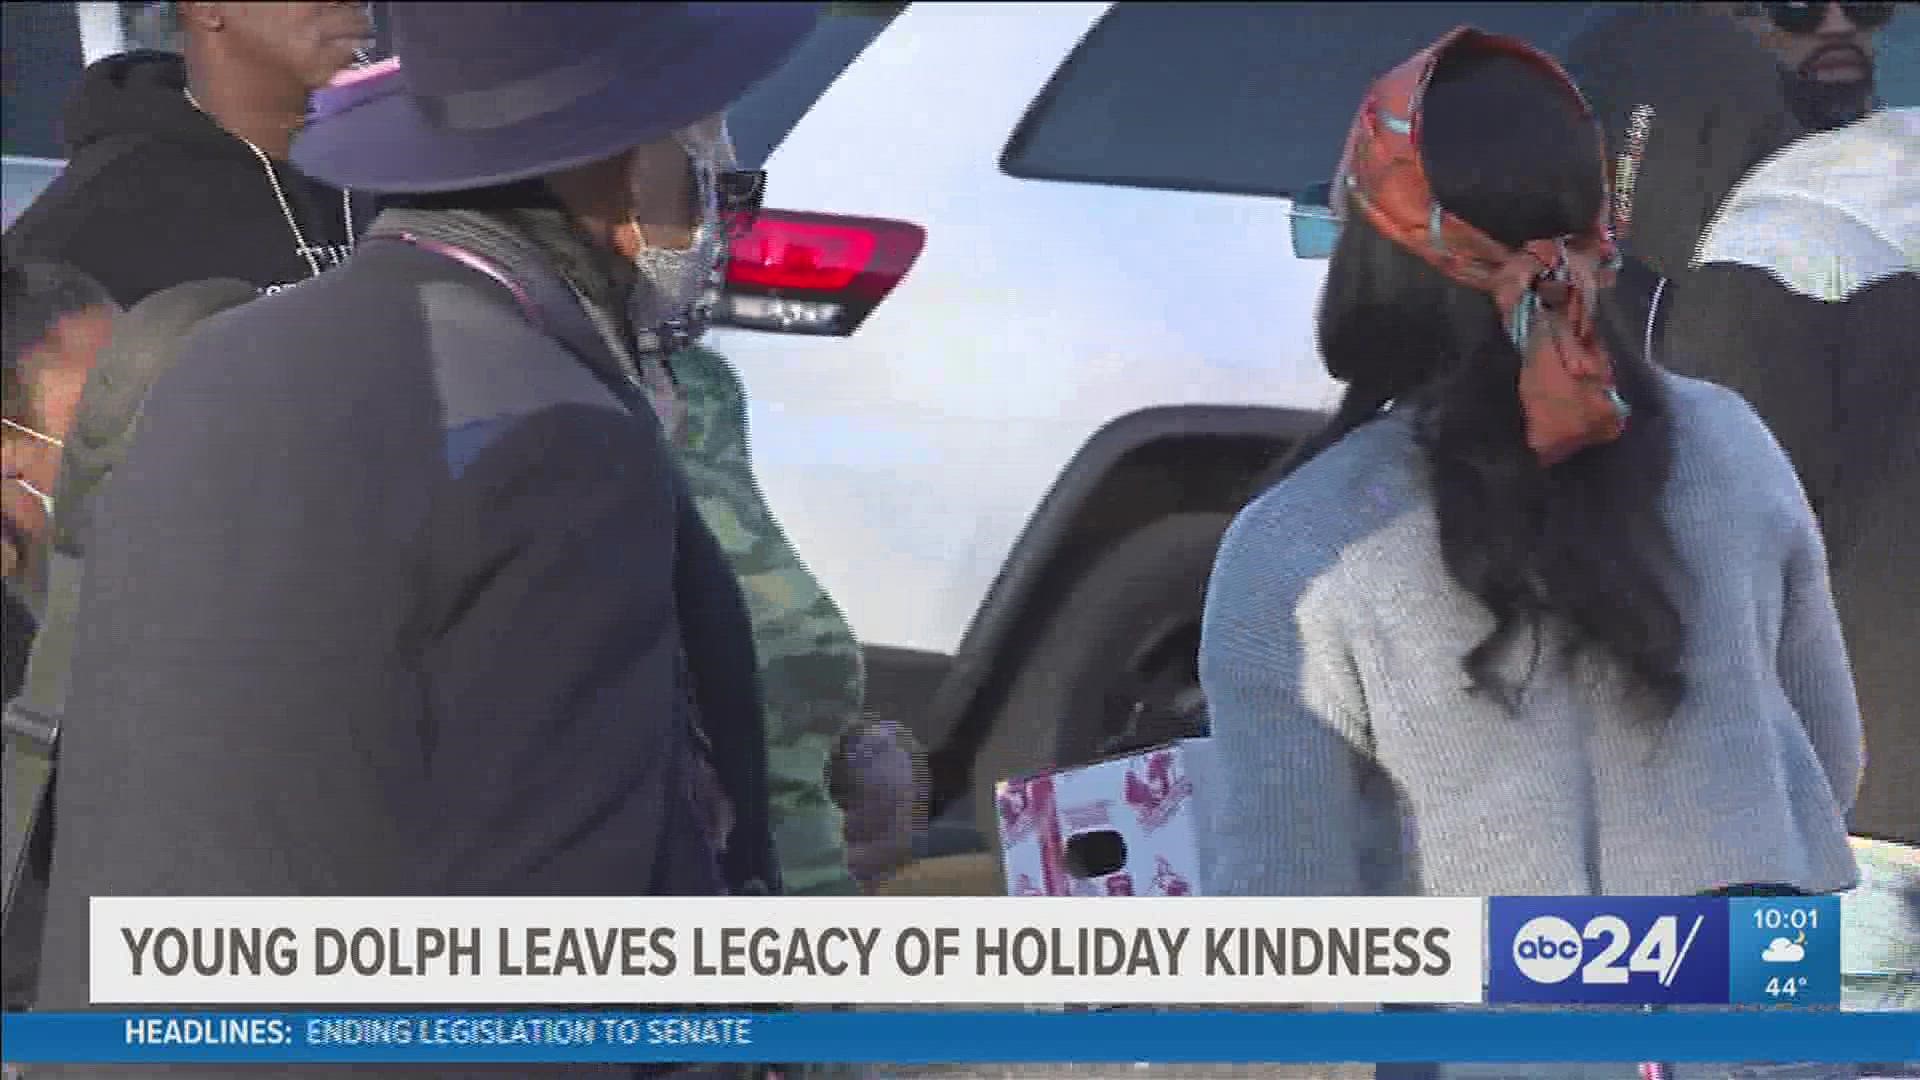 Many of the volunteers and people who benefitted from the turkey giveaway said this act of kindness is giving them the strength to heal following his death.